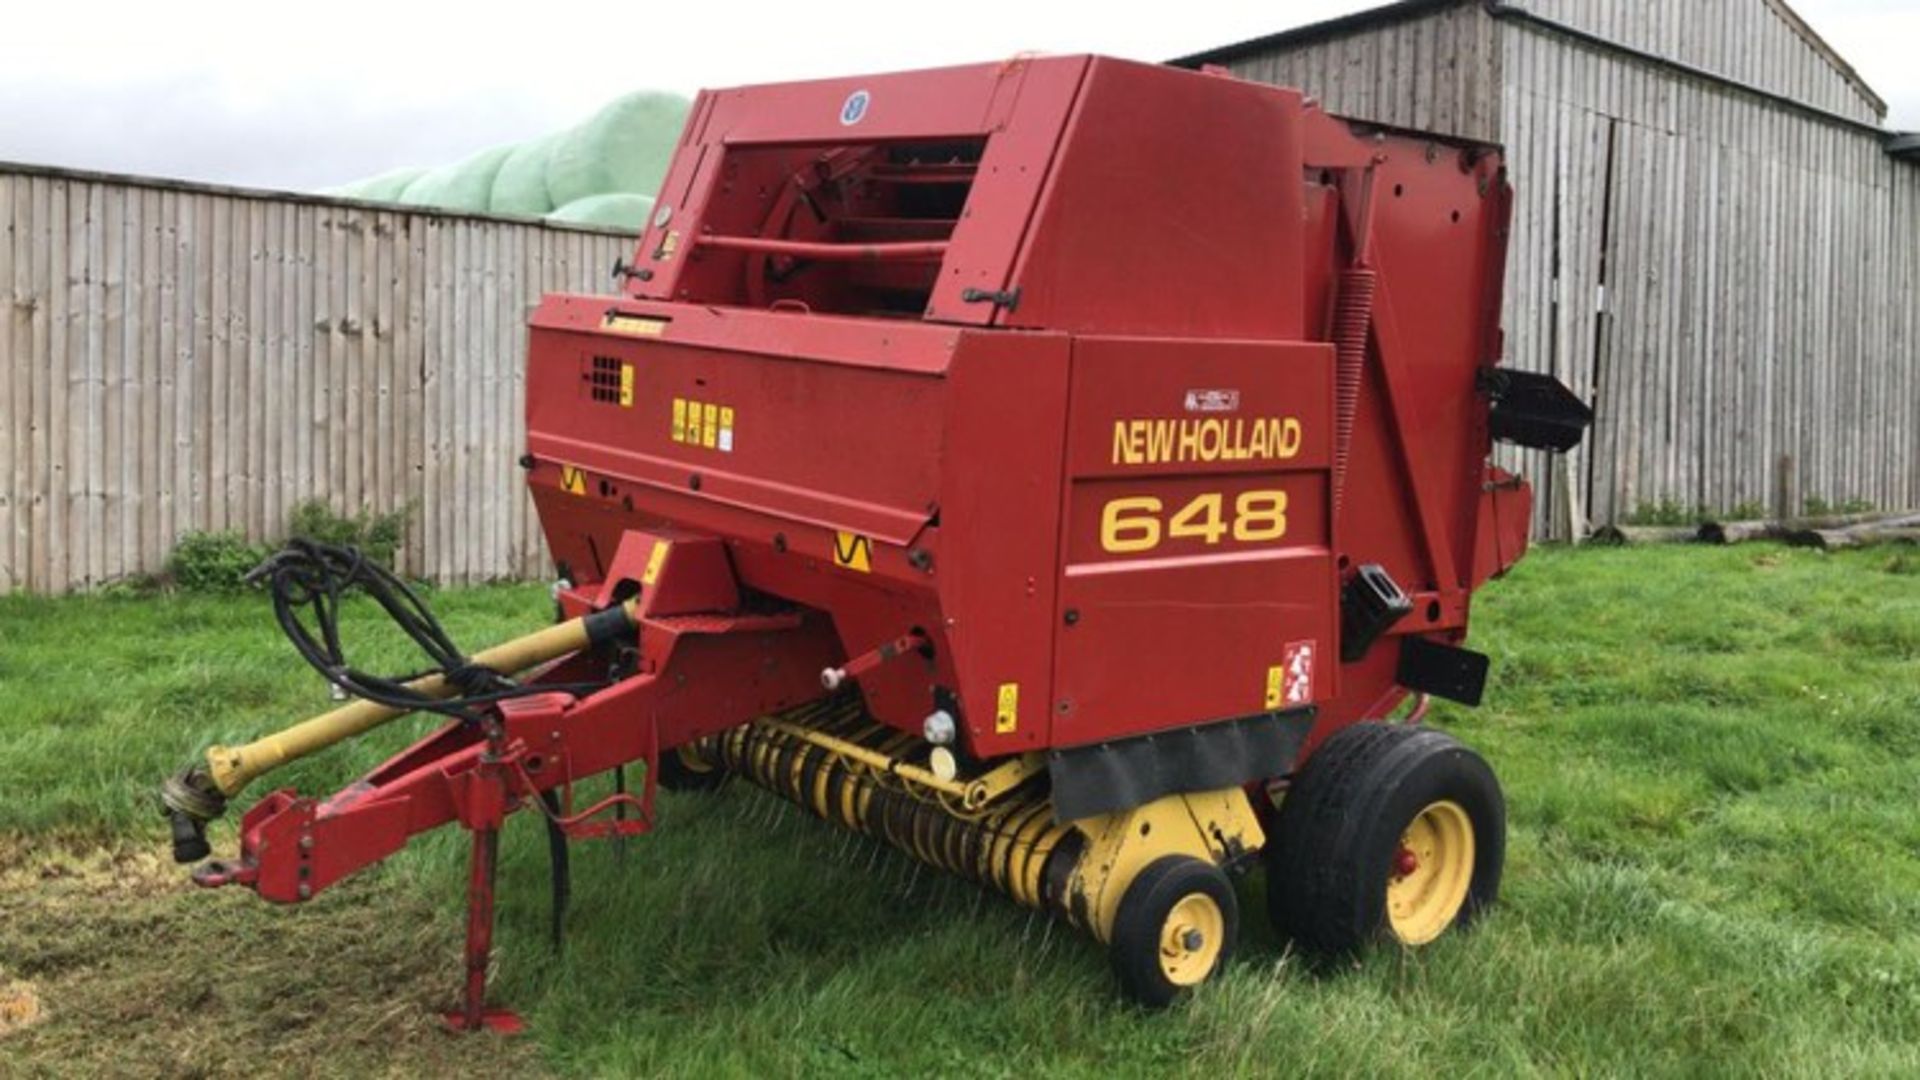 1999 New Holland 648 Variable Chamber Round Baler with control box